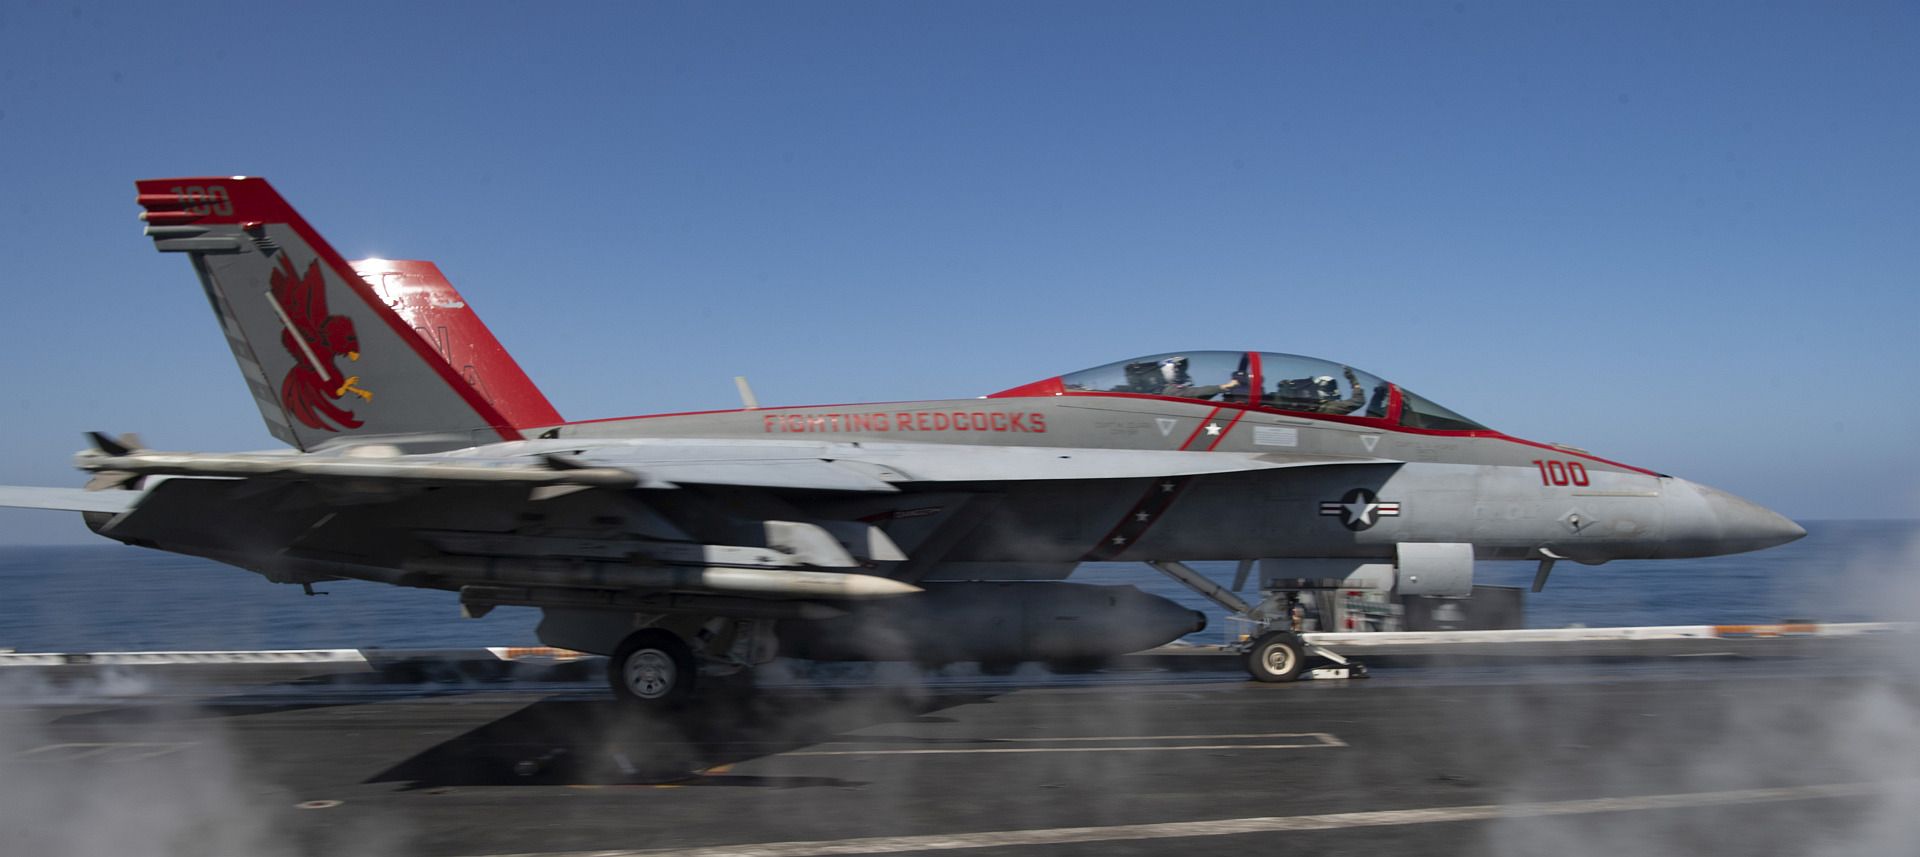  Launches Off The Flight Deck Of The Aircraft Carrier USS Nimitz